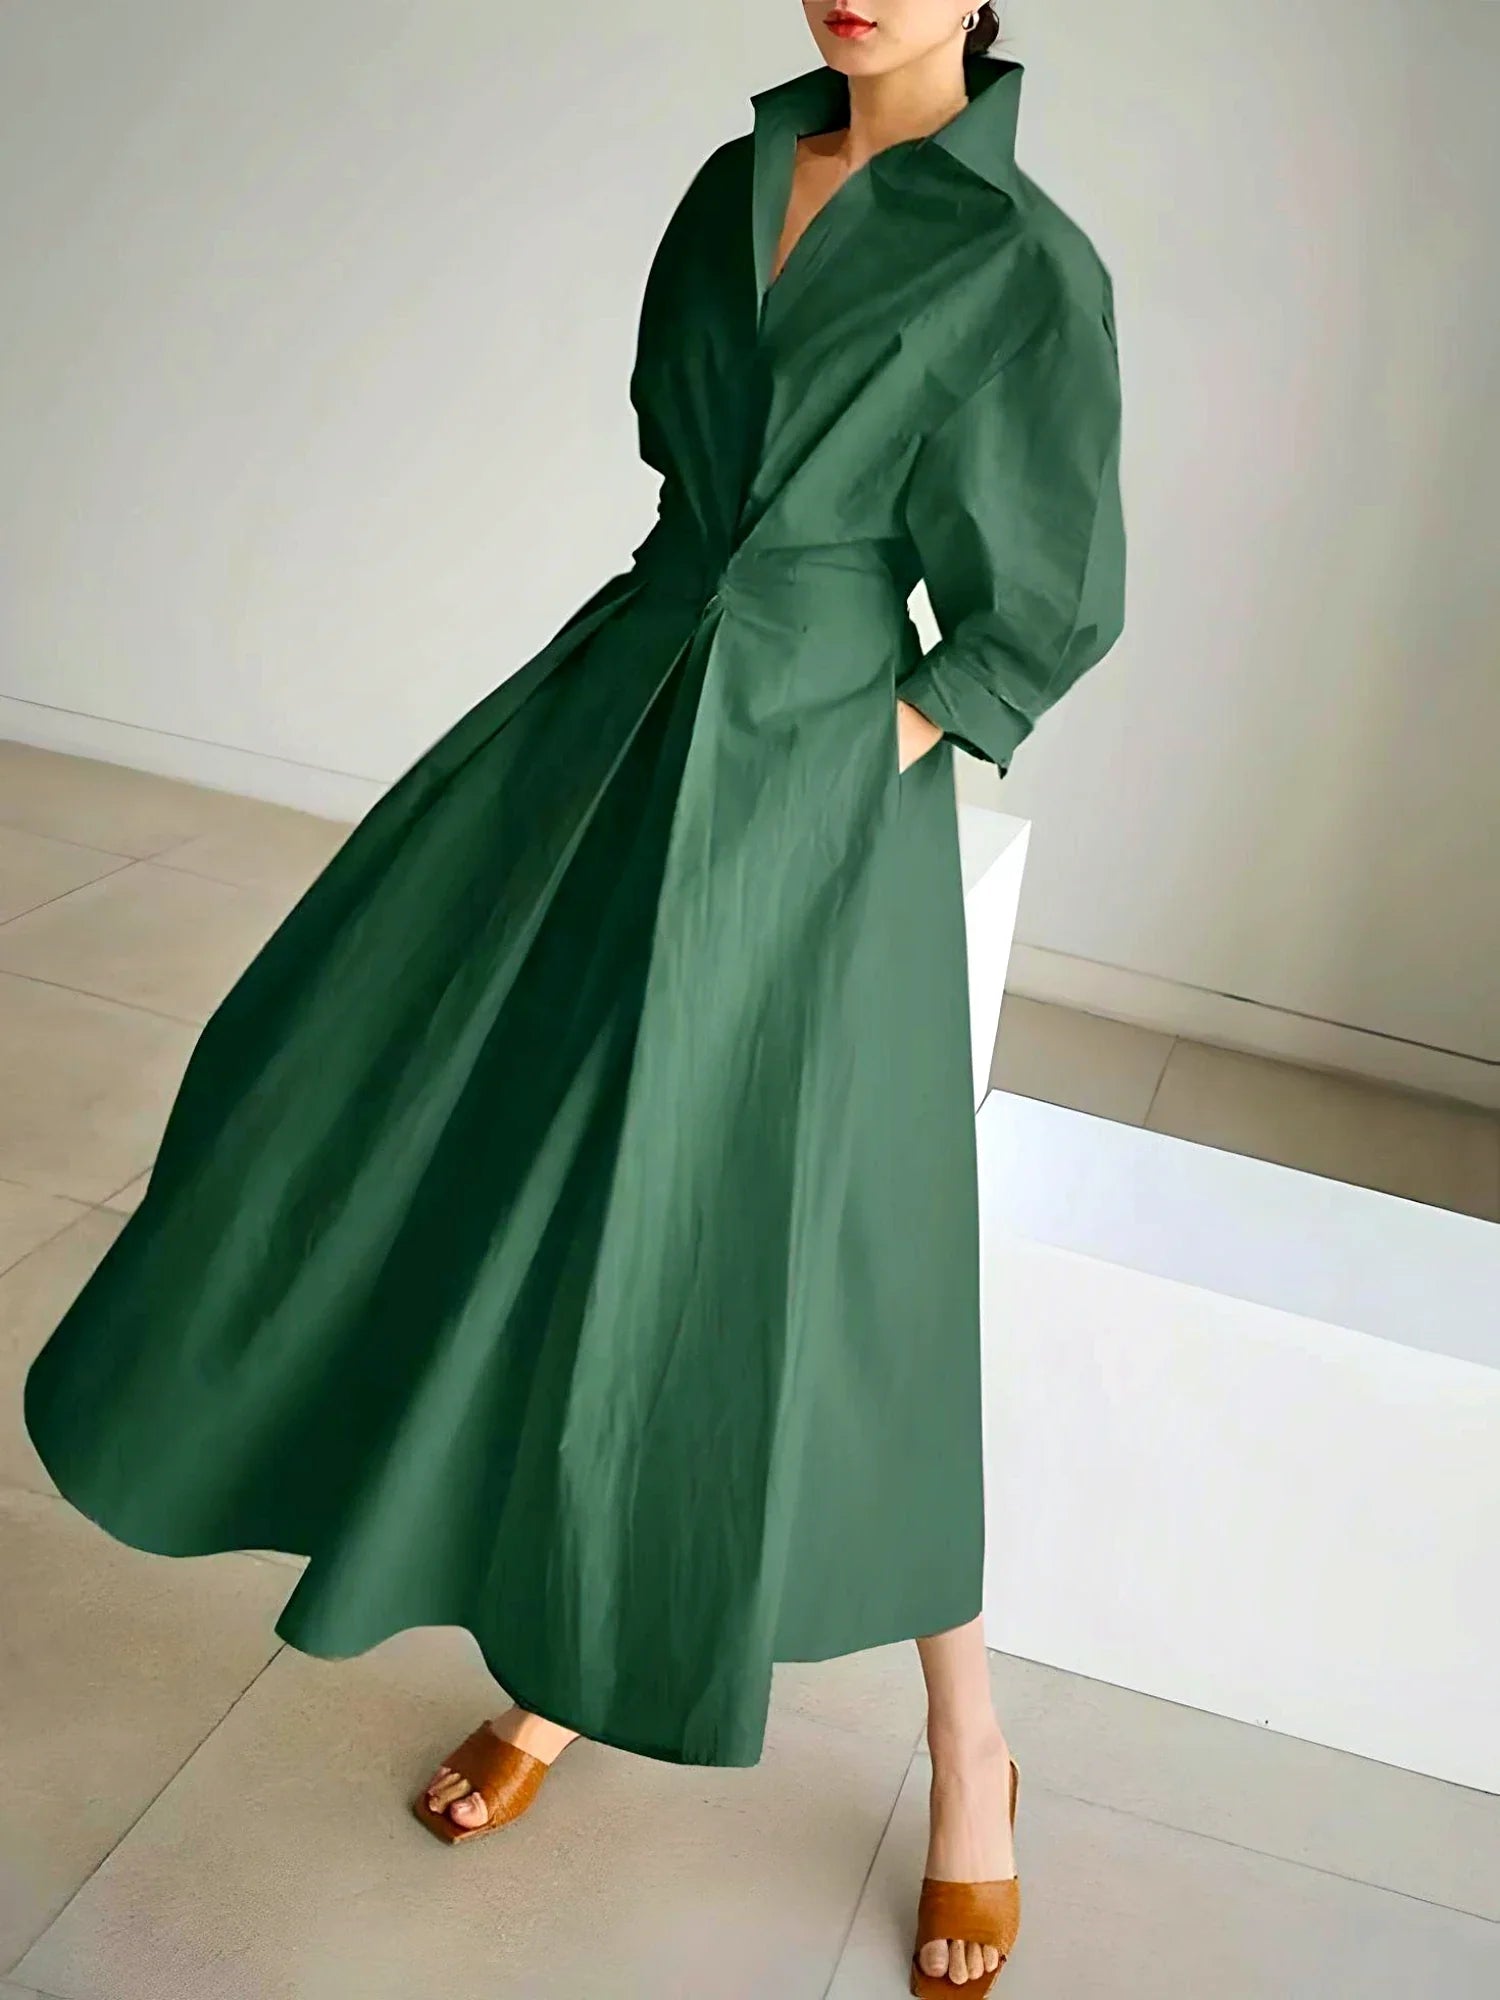 Catalina | Chic Sophisticated Maxi Dress - Green / S - AMVIM